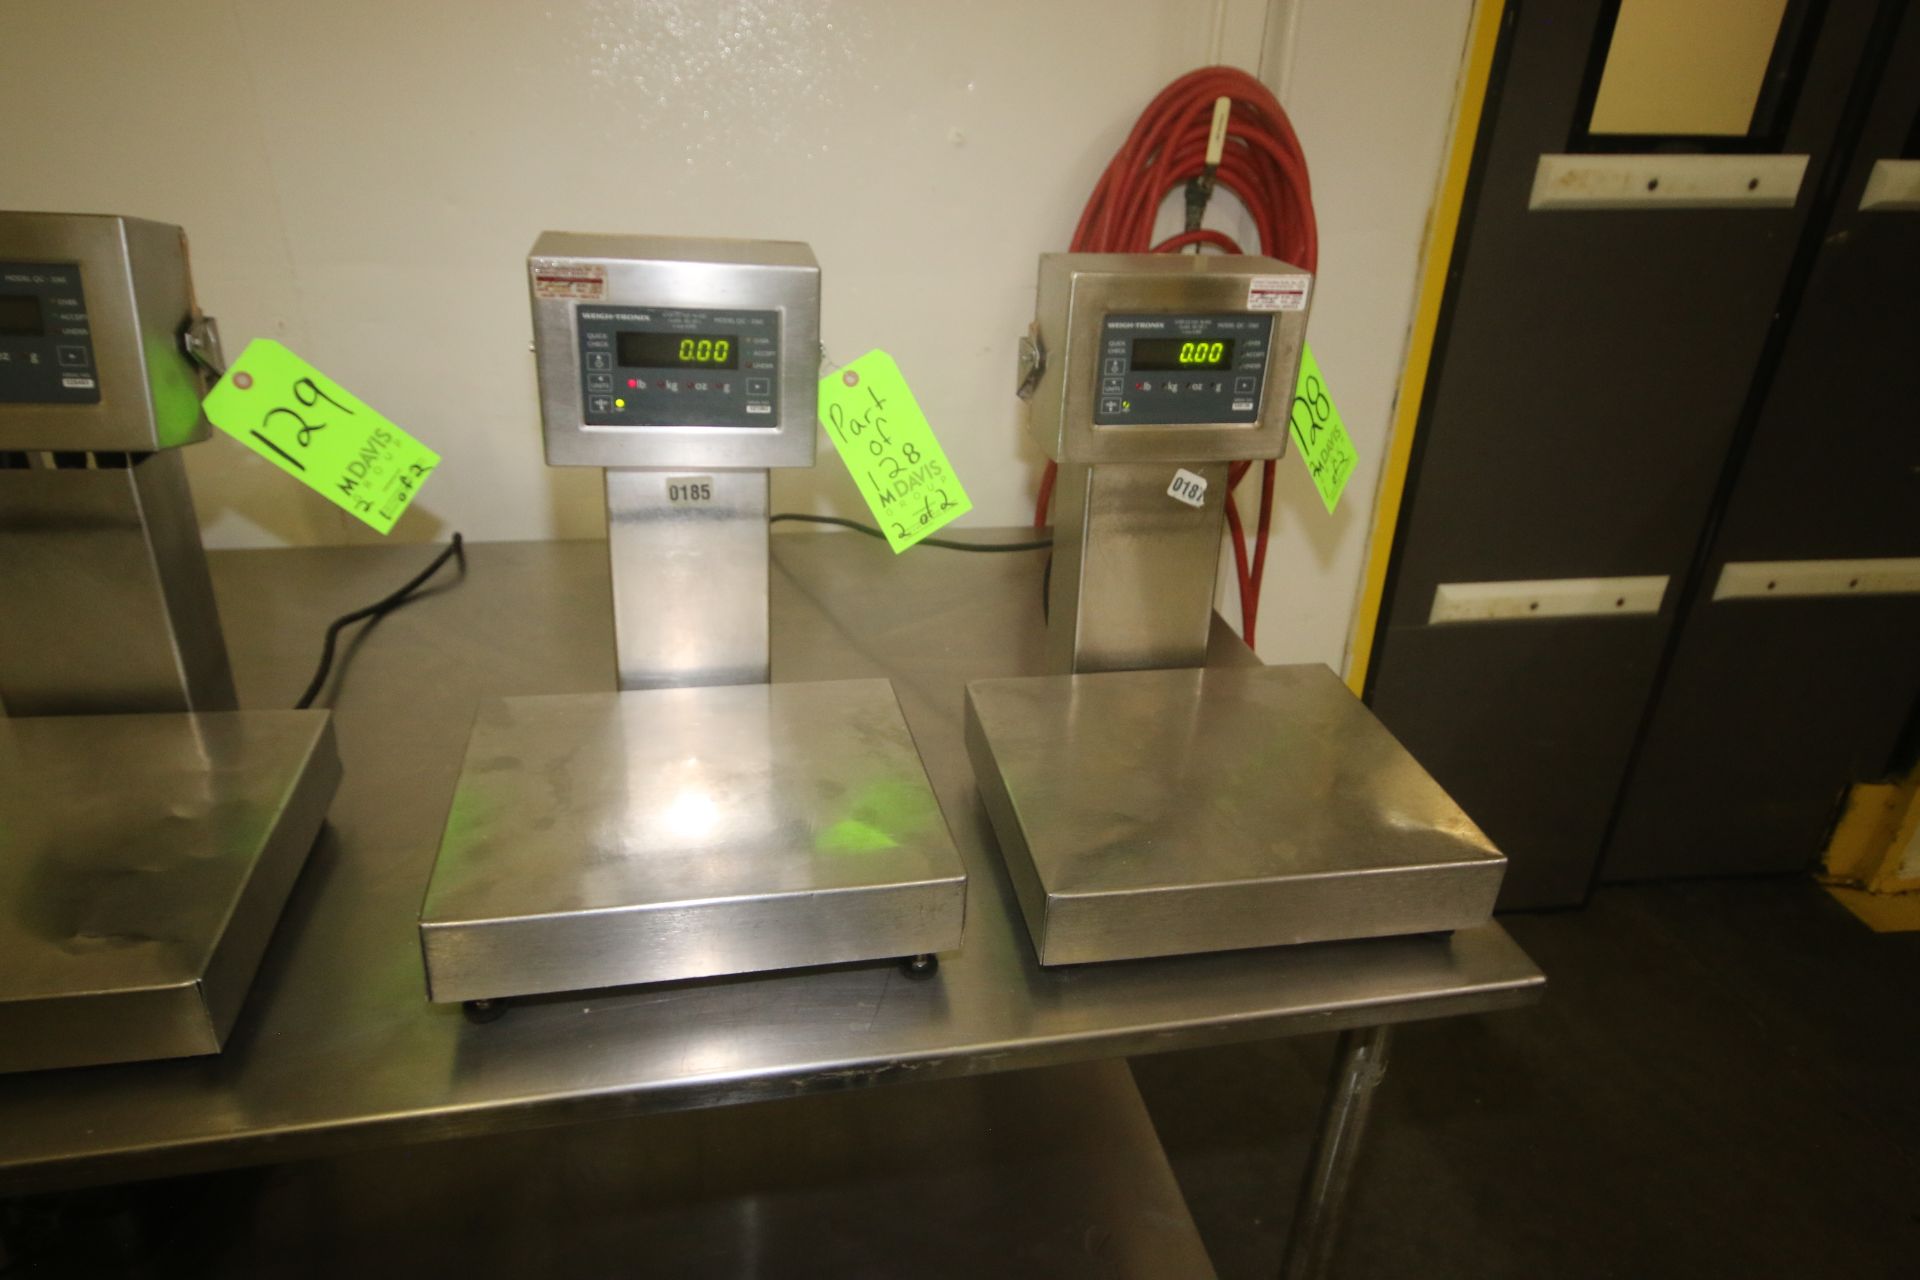 Weigh-Tronix S/S Platform Scales, M/N QC-3265, with Aprox. 13-1/2" L x 12" W S/S Platforms, 115